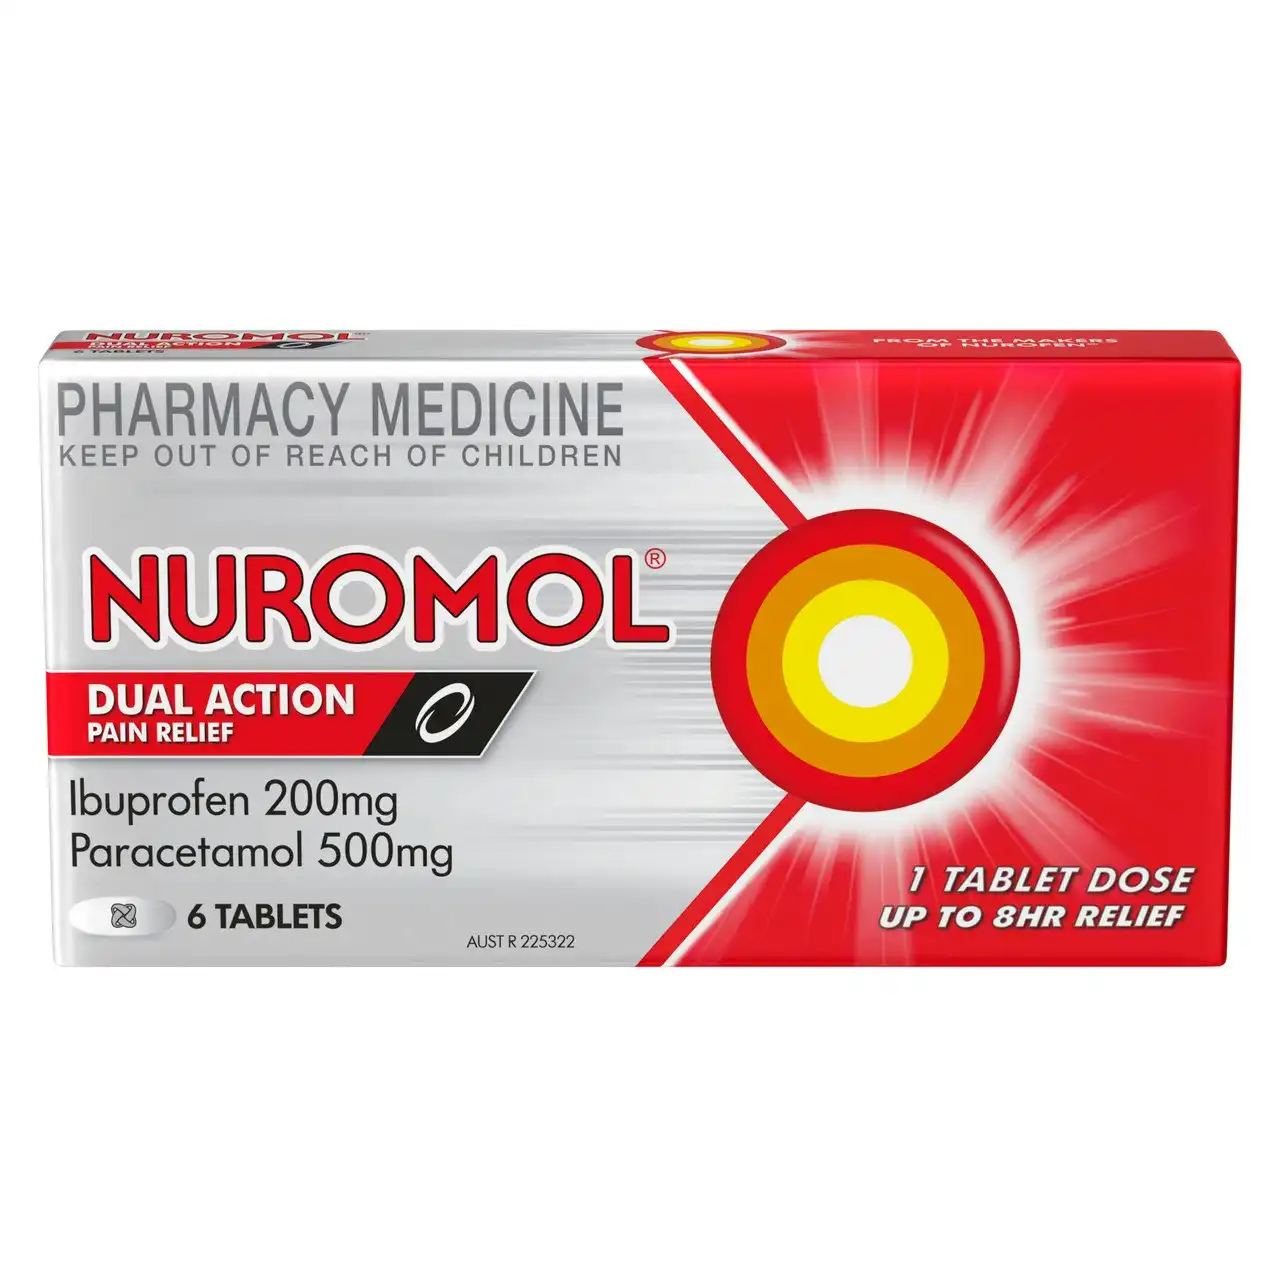 NUROMOL 200mg Strong Pain Relief Tablets Ibuprofen/500mg Paracetamol 6 pack